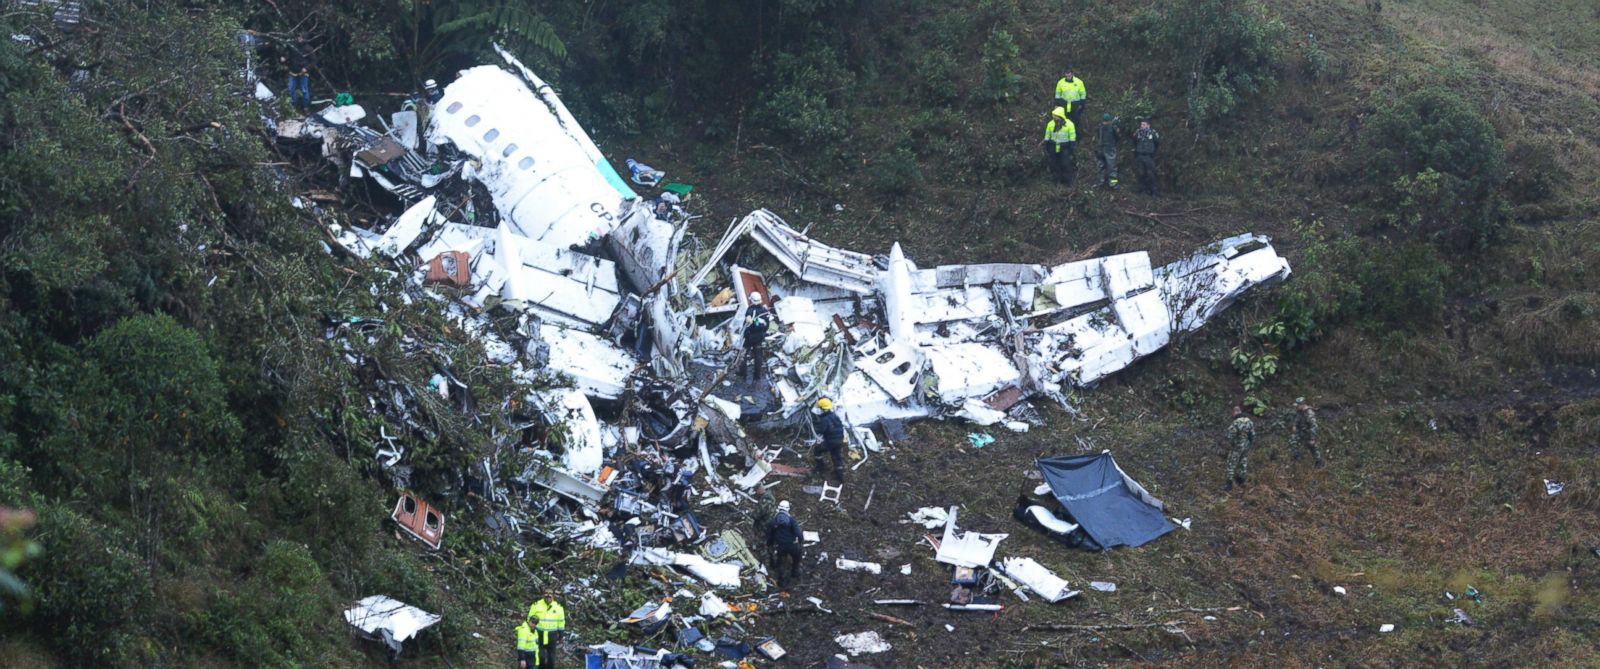 Colombia Plane Crash Moments After Rescue, Survivor Cried Out for His